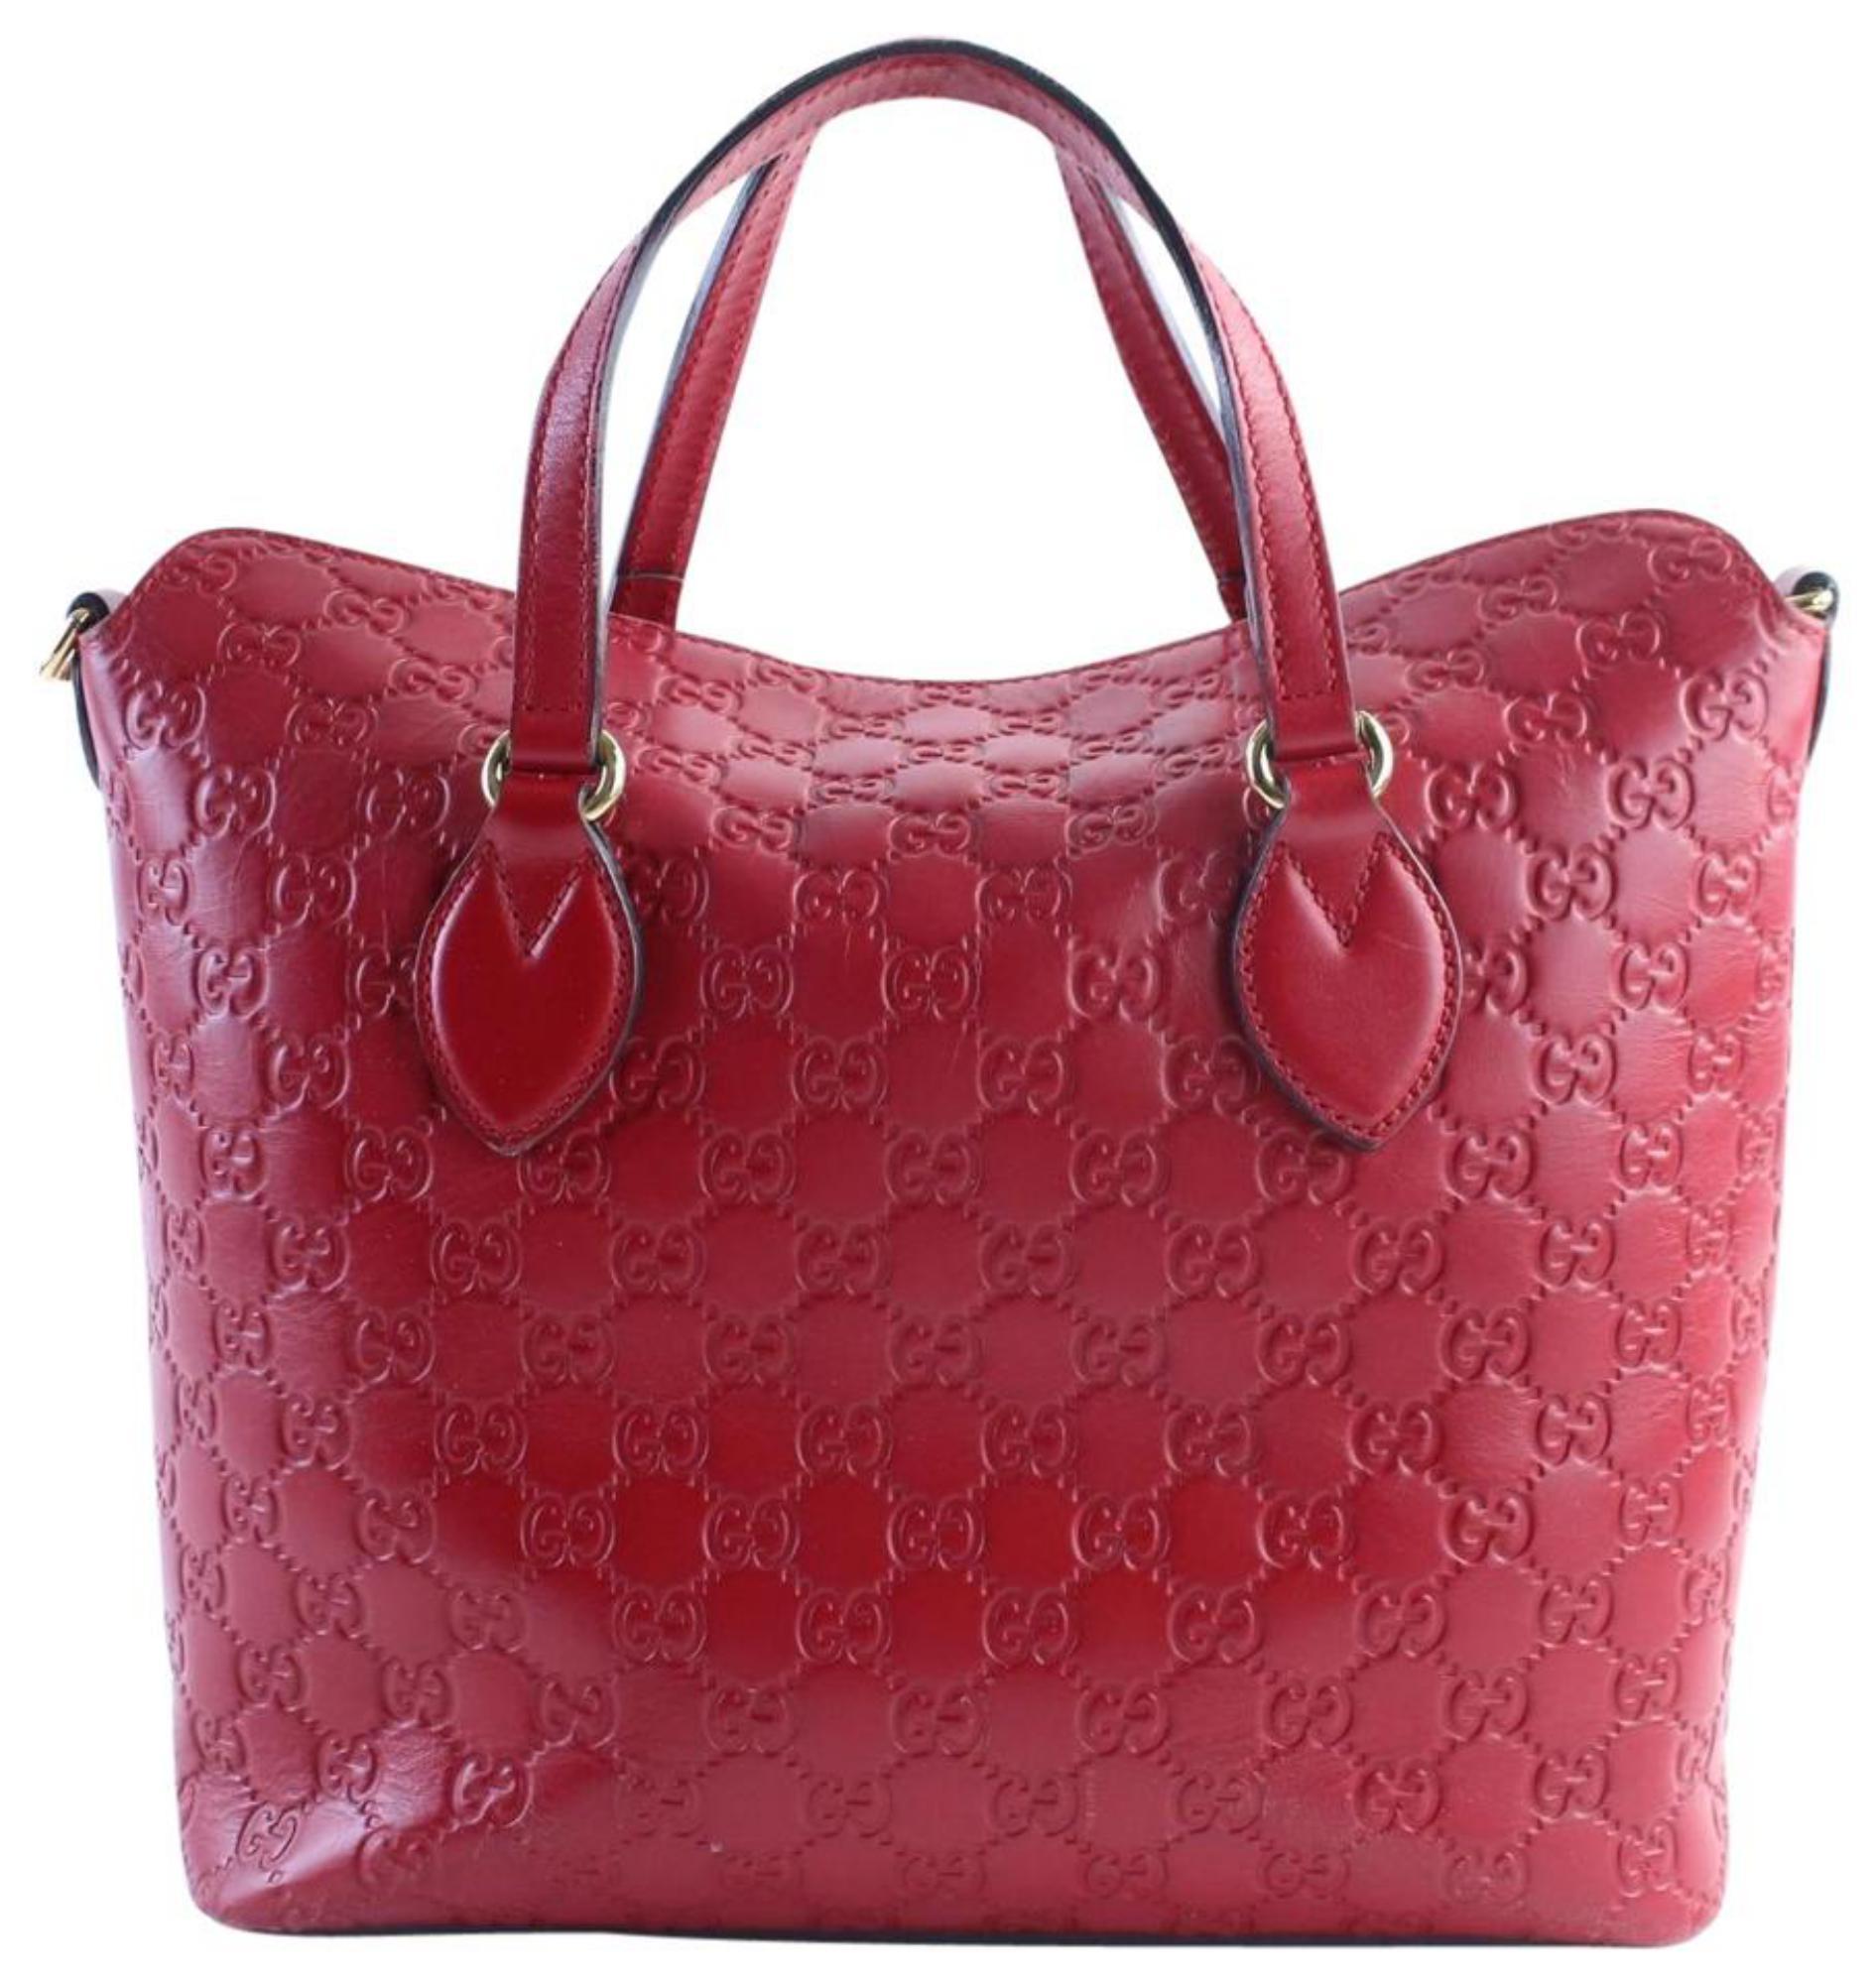 Gucci Top Handle Tote 11gr0606 Red Guccissima Leather Shoulder Bag For Sale